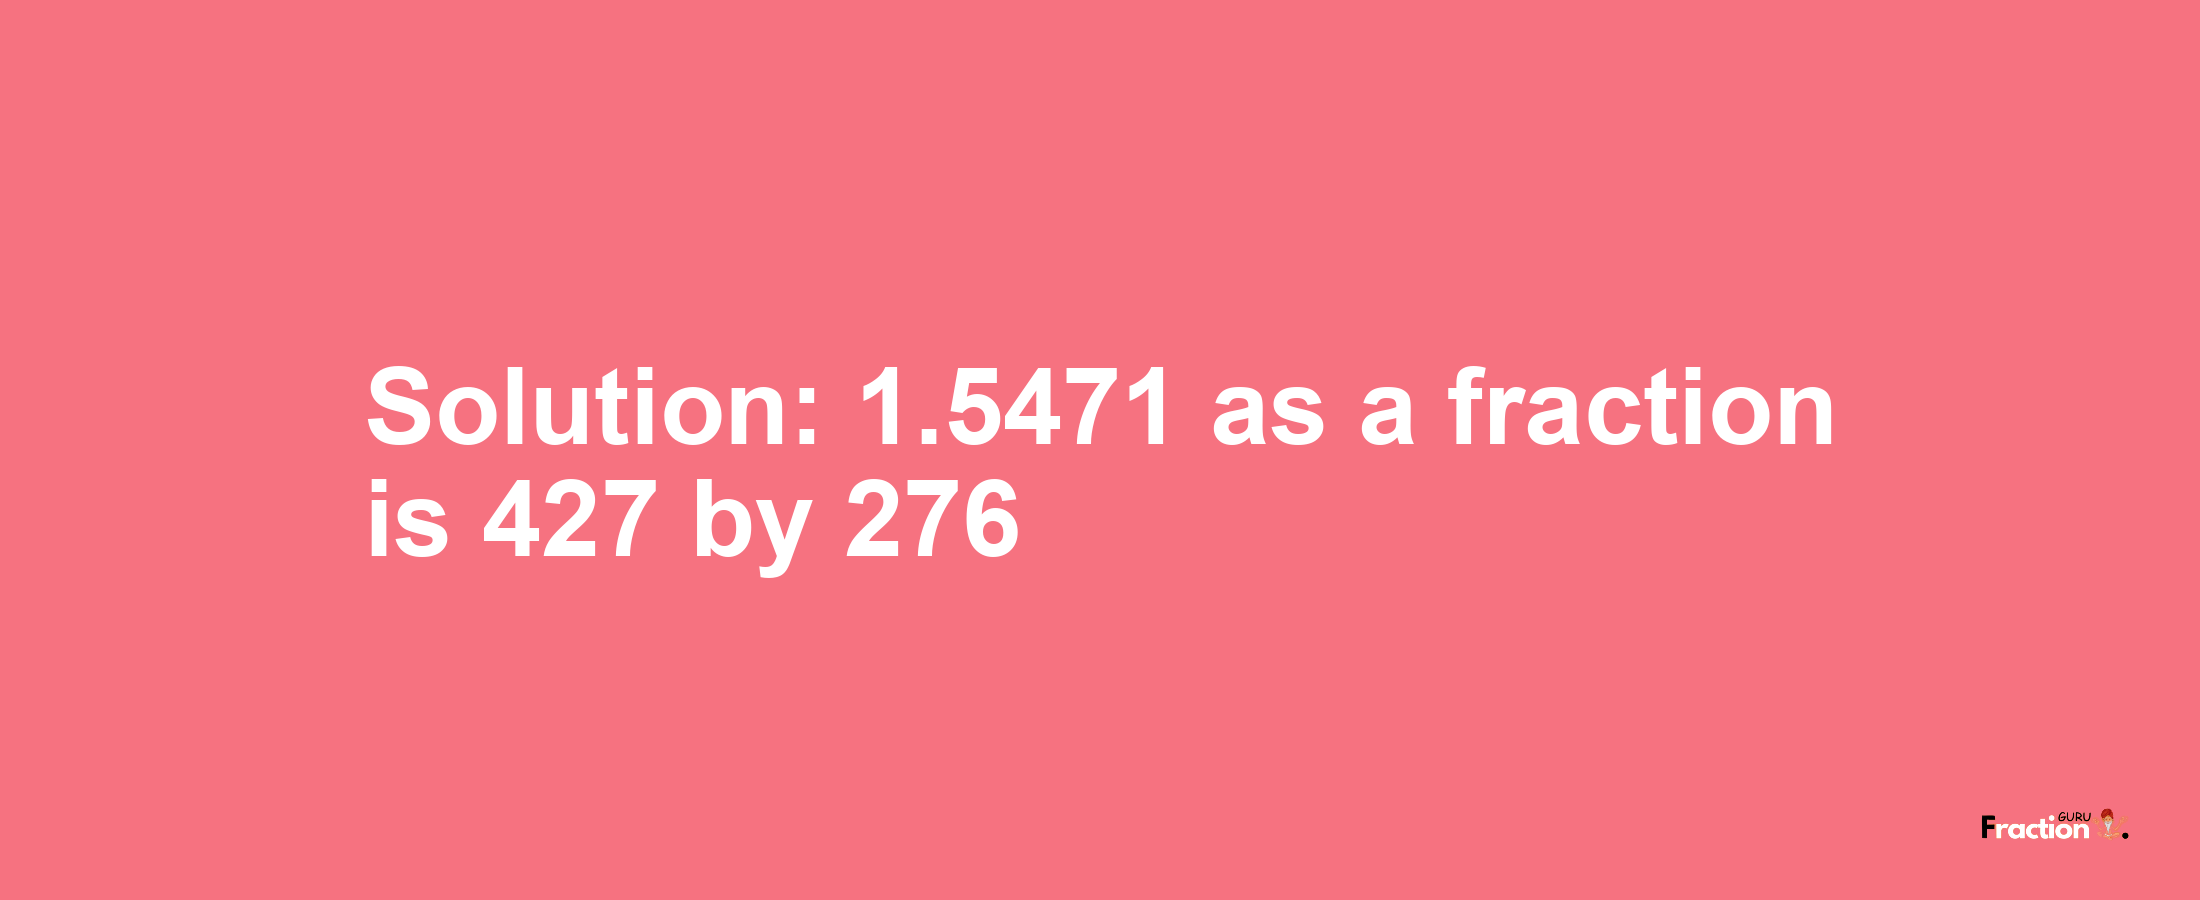 Solution:1.5471 as a fraction is 427/276